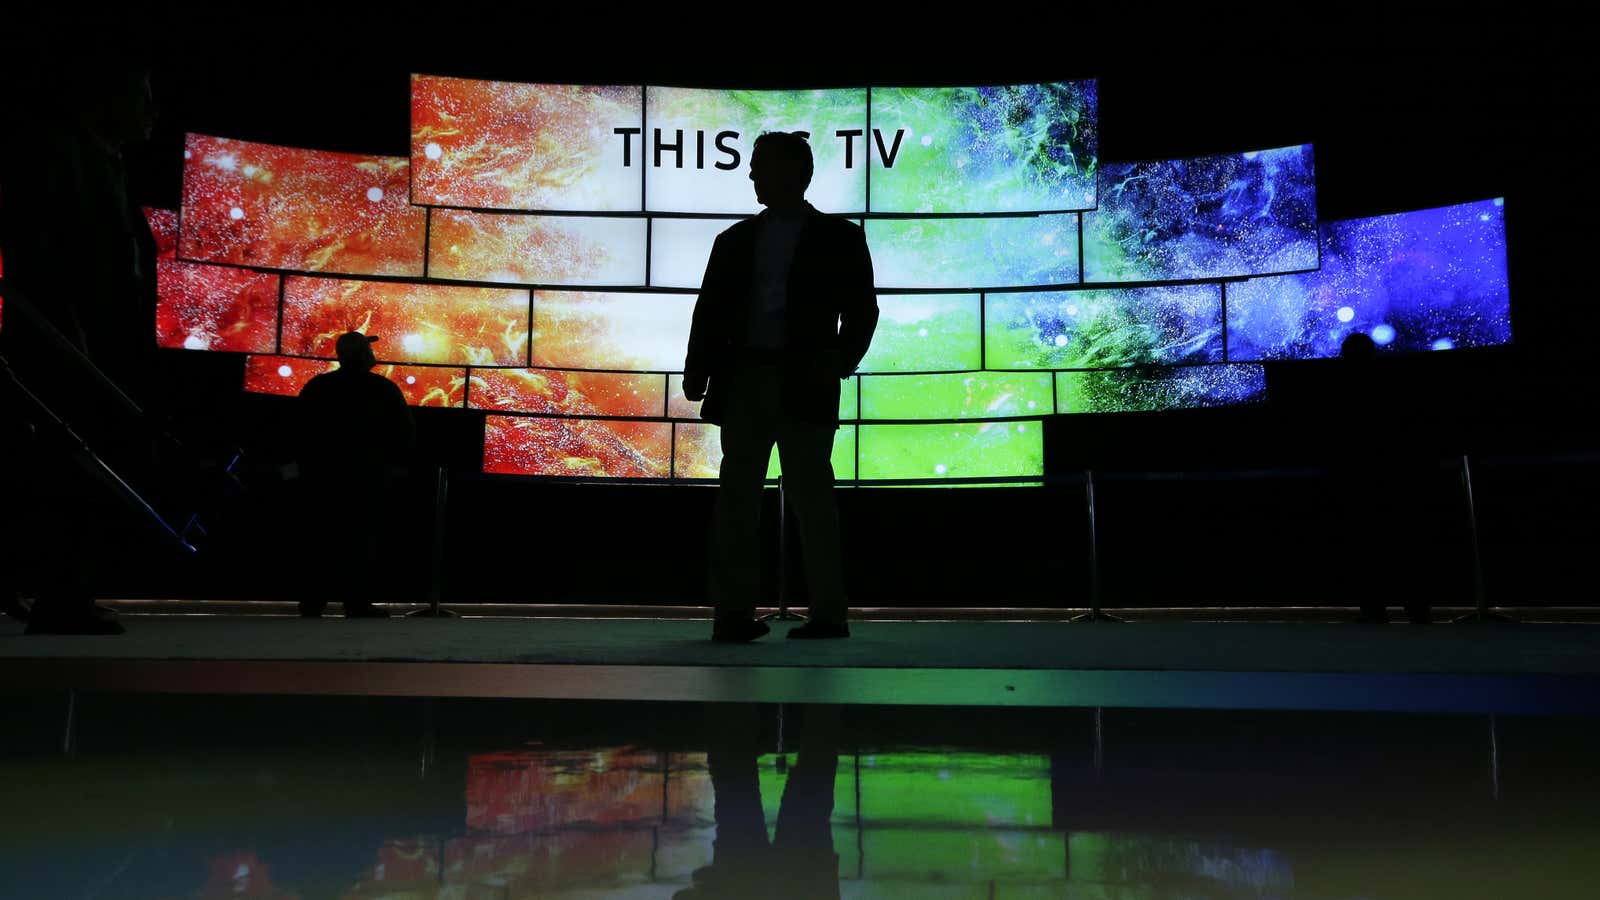 TVs are just the beginning.